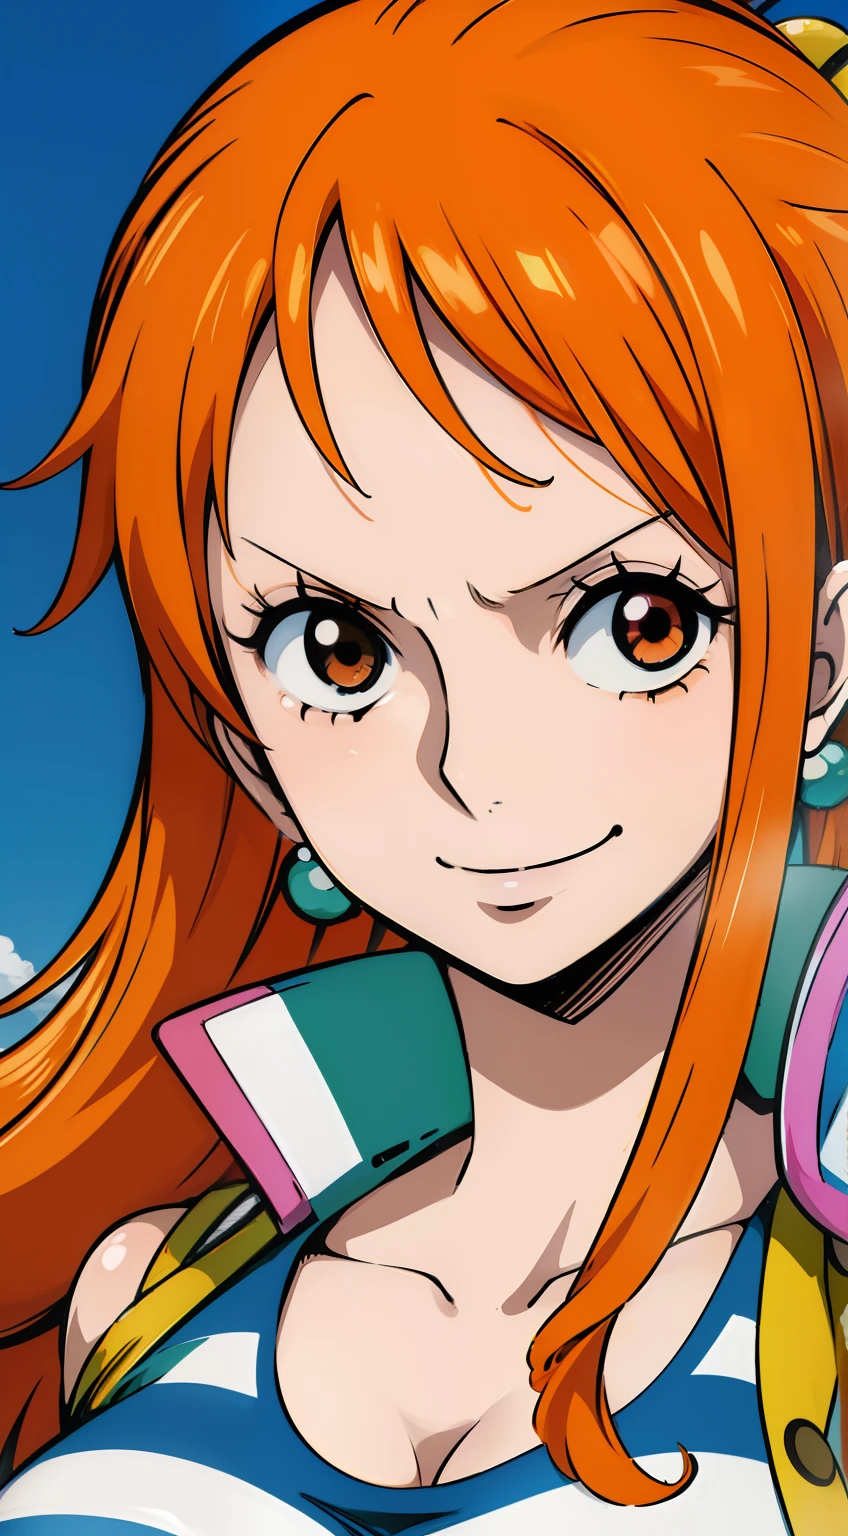 Generate a realistic anime-style image of Nami from One Piece. Capture her distinct appearance with orange hair, a blue and white striped shirt, and a cheerful expression. Ensure that the image reflects her adventurous and confident personality as portrayed in the anime., Wide shot , full body, curvy athletic, large breast, thicc thighs, nsfw